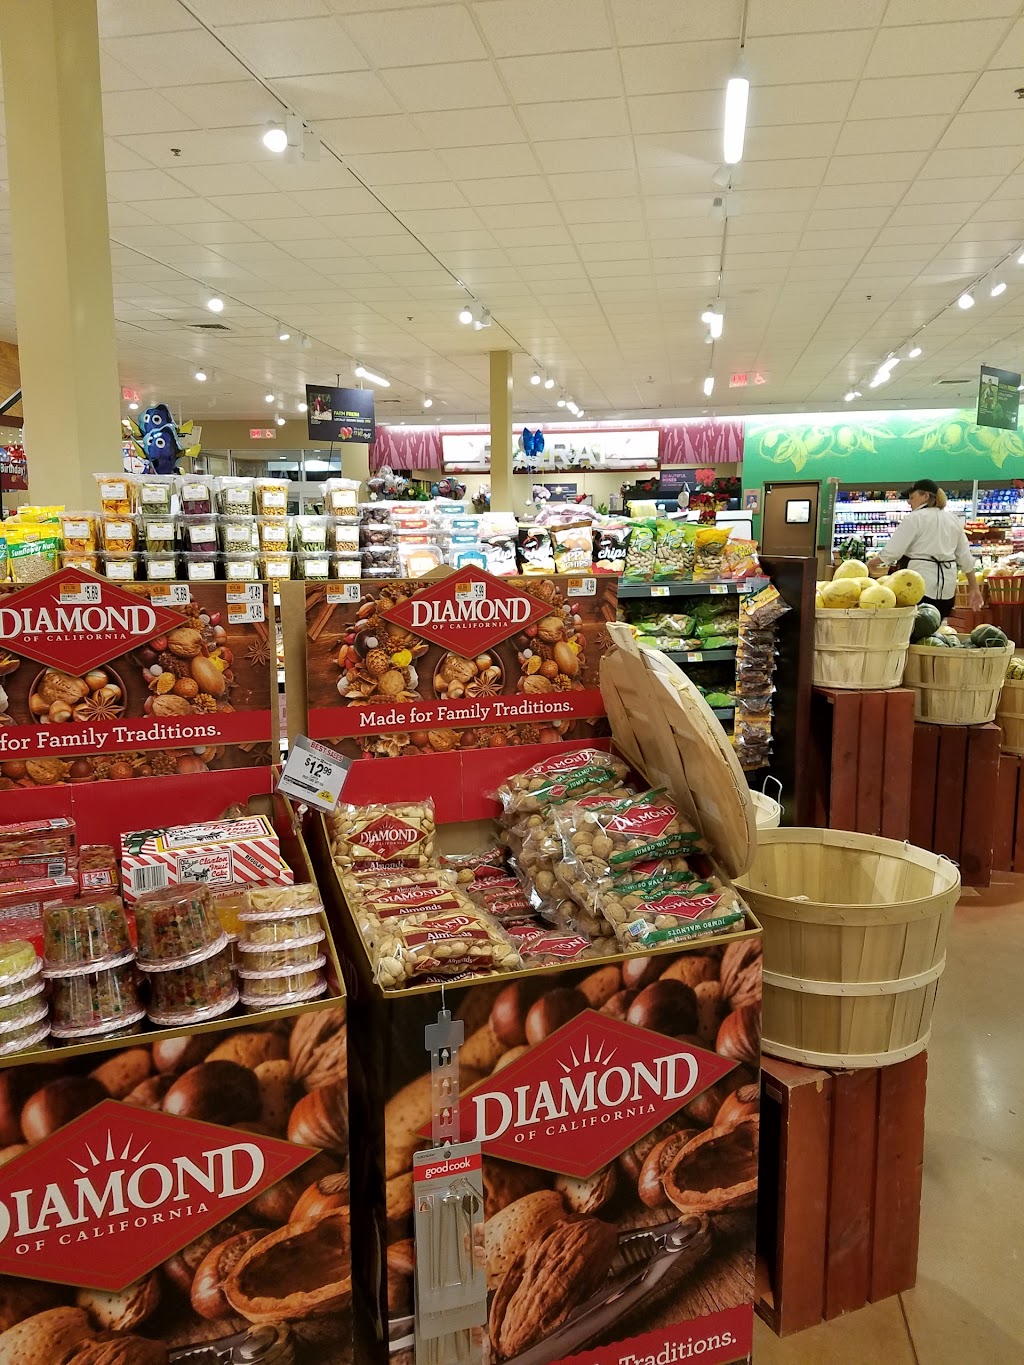 Big Y World Class Market | 22 Spencer Plains Rd, Old Saybrook, CT 06475 | Phone: (860) 395-0511